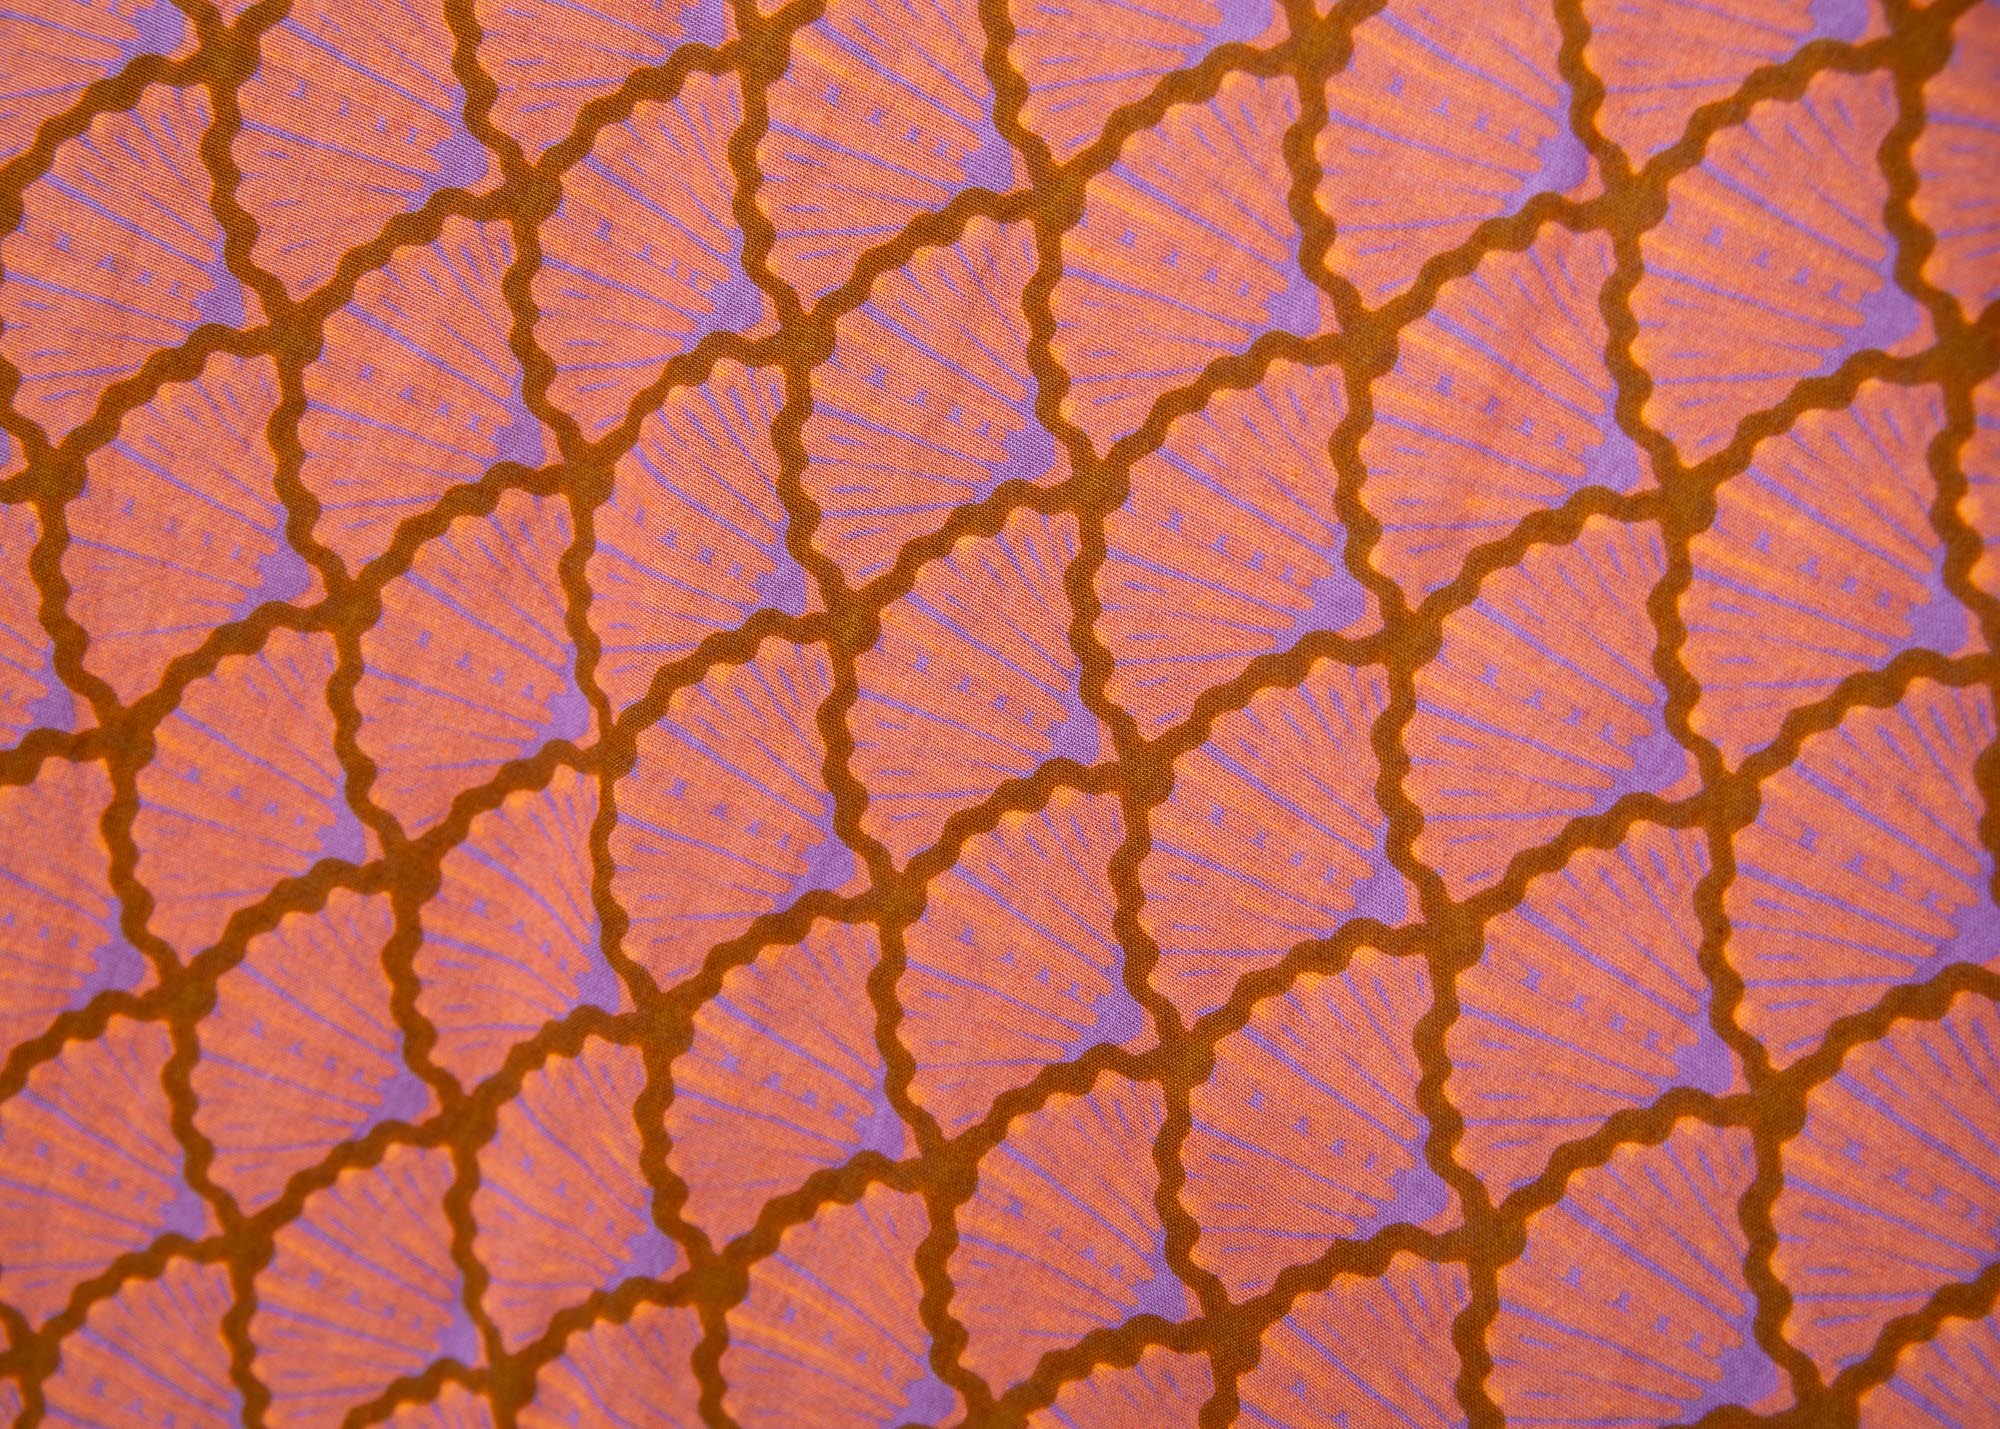 Close up display of peach-pink, lavender and brown seashell print dress